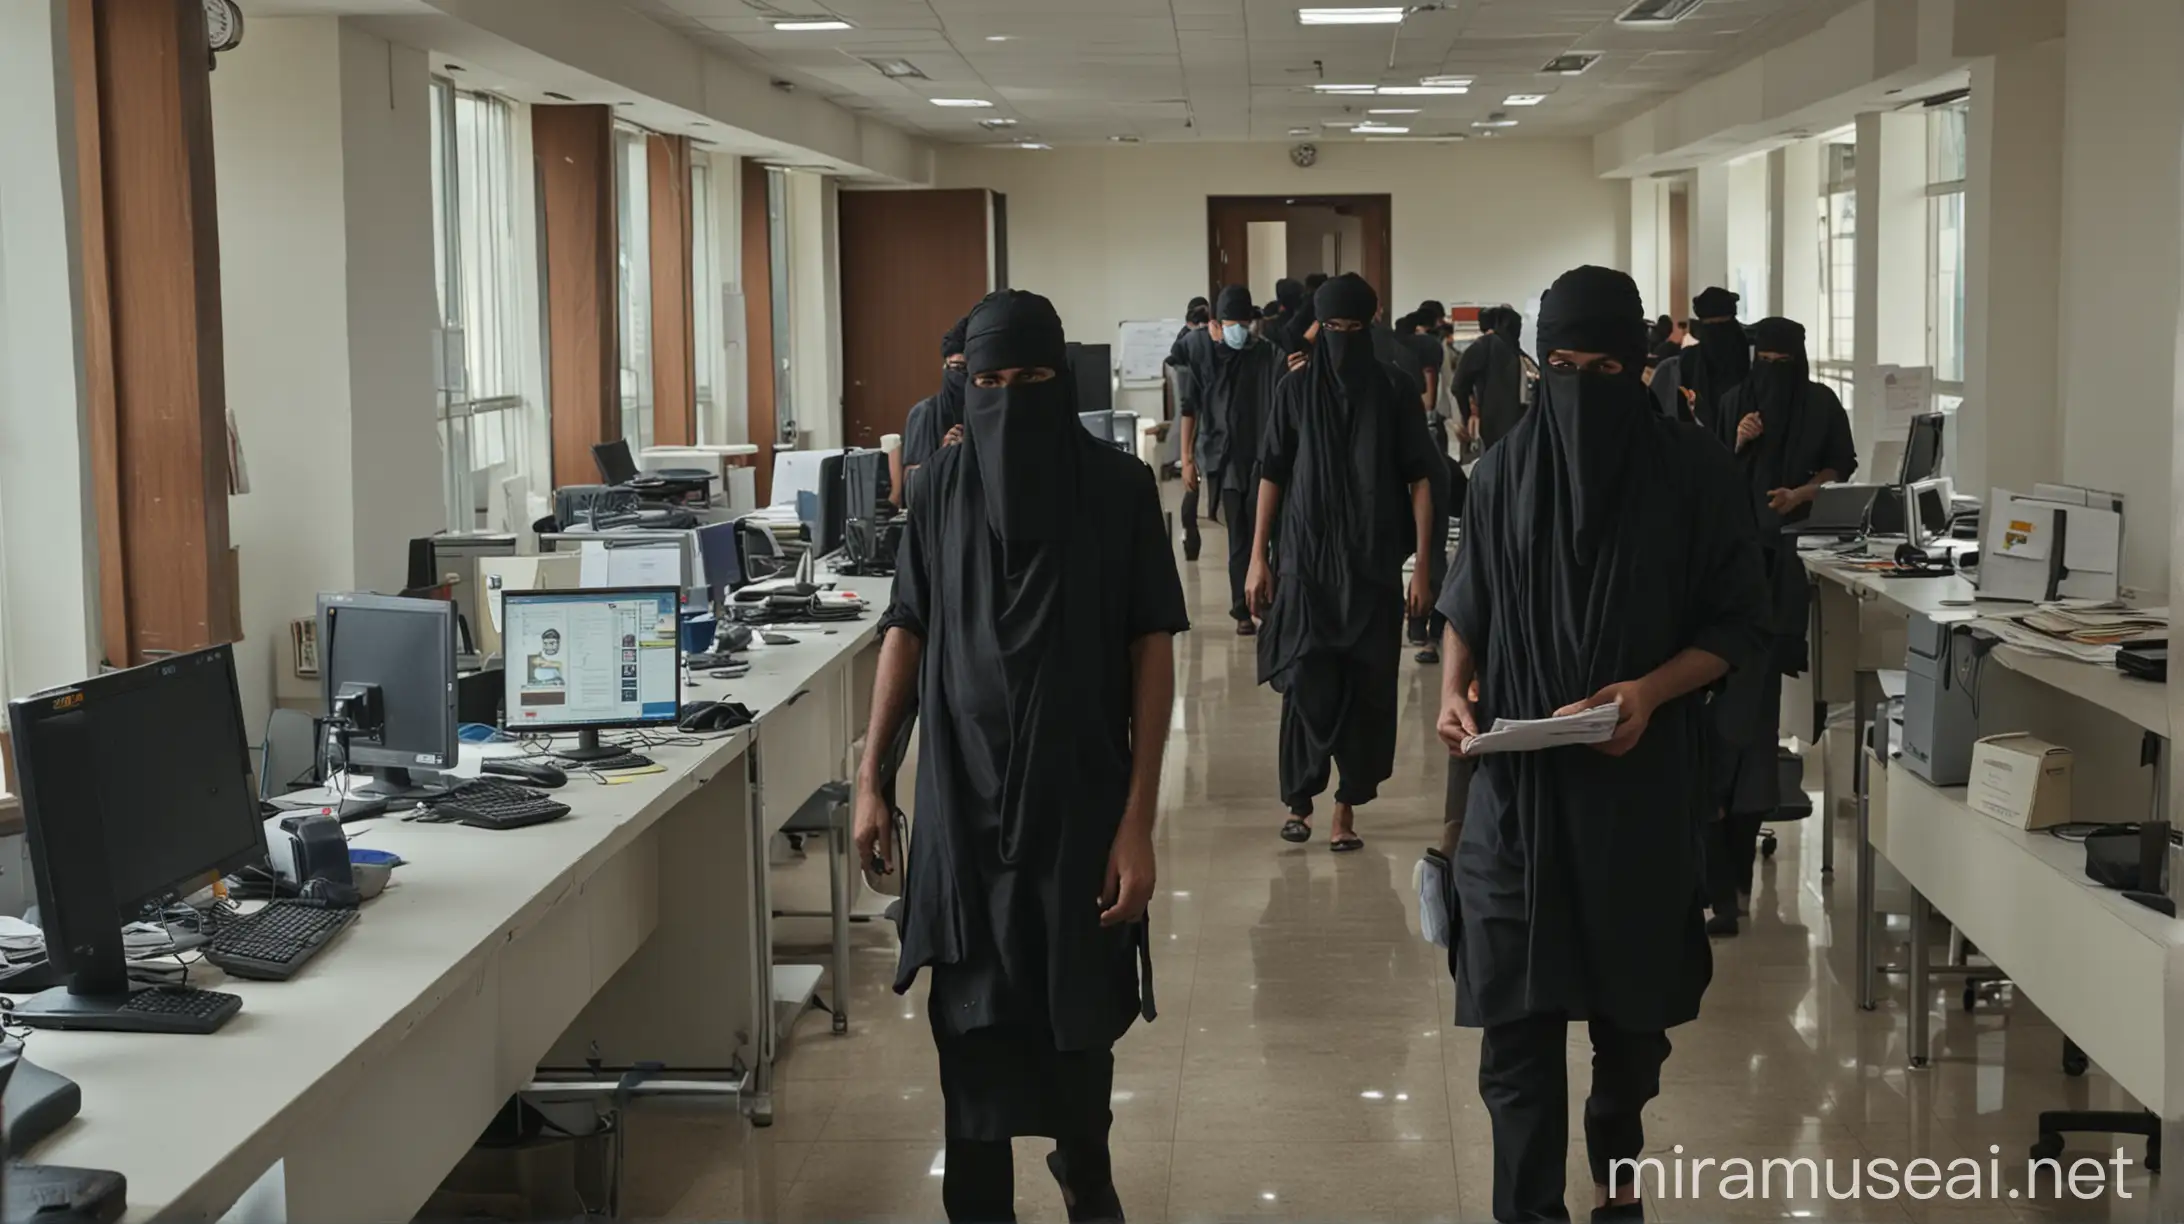 Indian men with black cloths and face cover enter Indian government office, long shot, some people working on computer, detailed